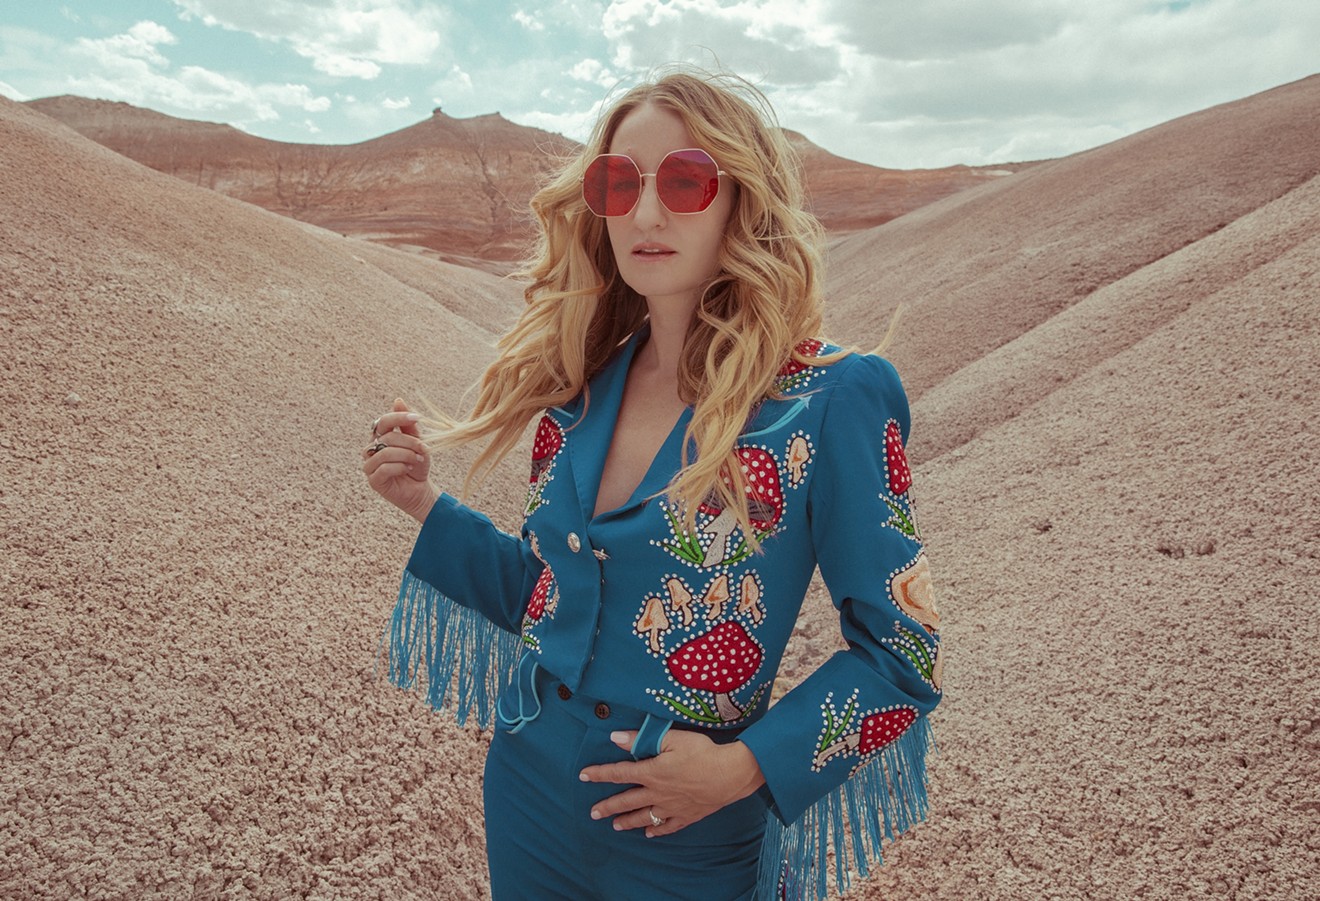 Margo Price is scheduled to perform on Friday at the Dreamy Draw Music Festival.